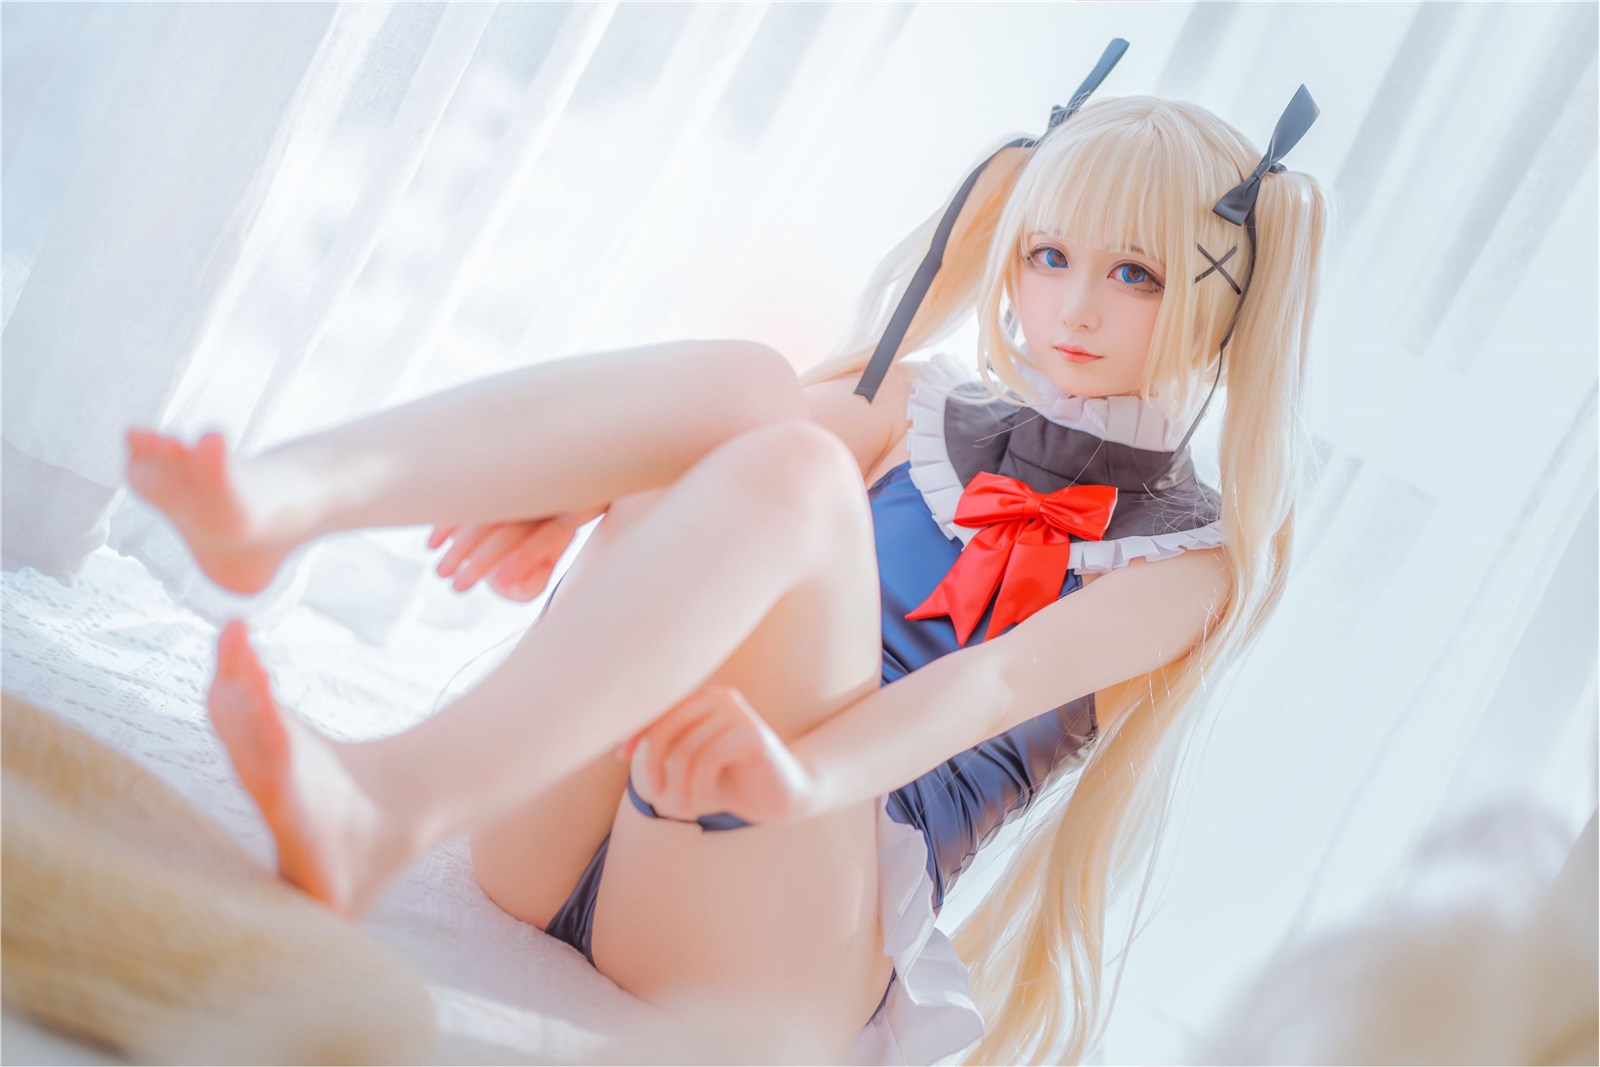 Cos sayako four years old this year - Mary Ross swimsuit コ ス プ レ photo(17)